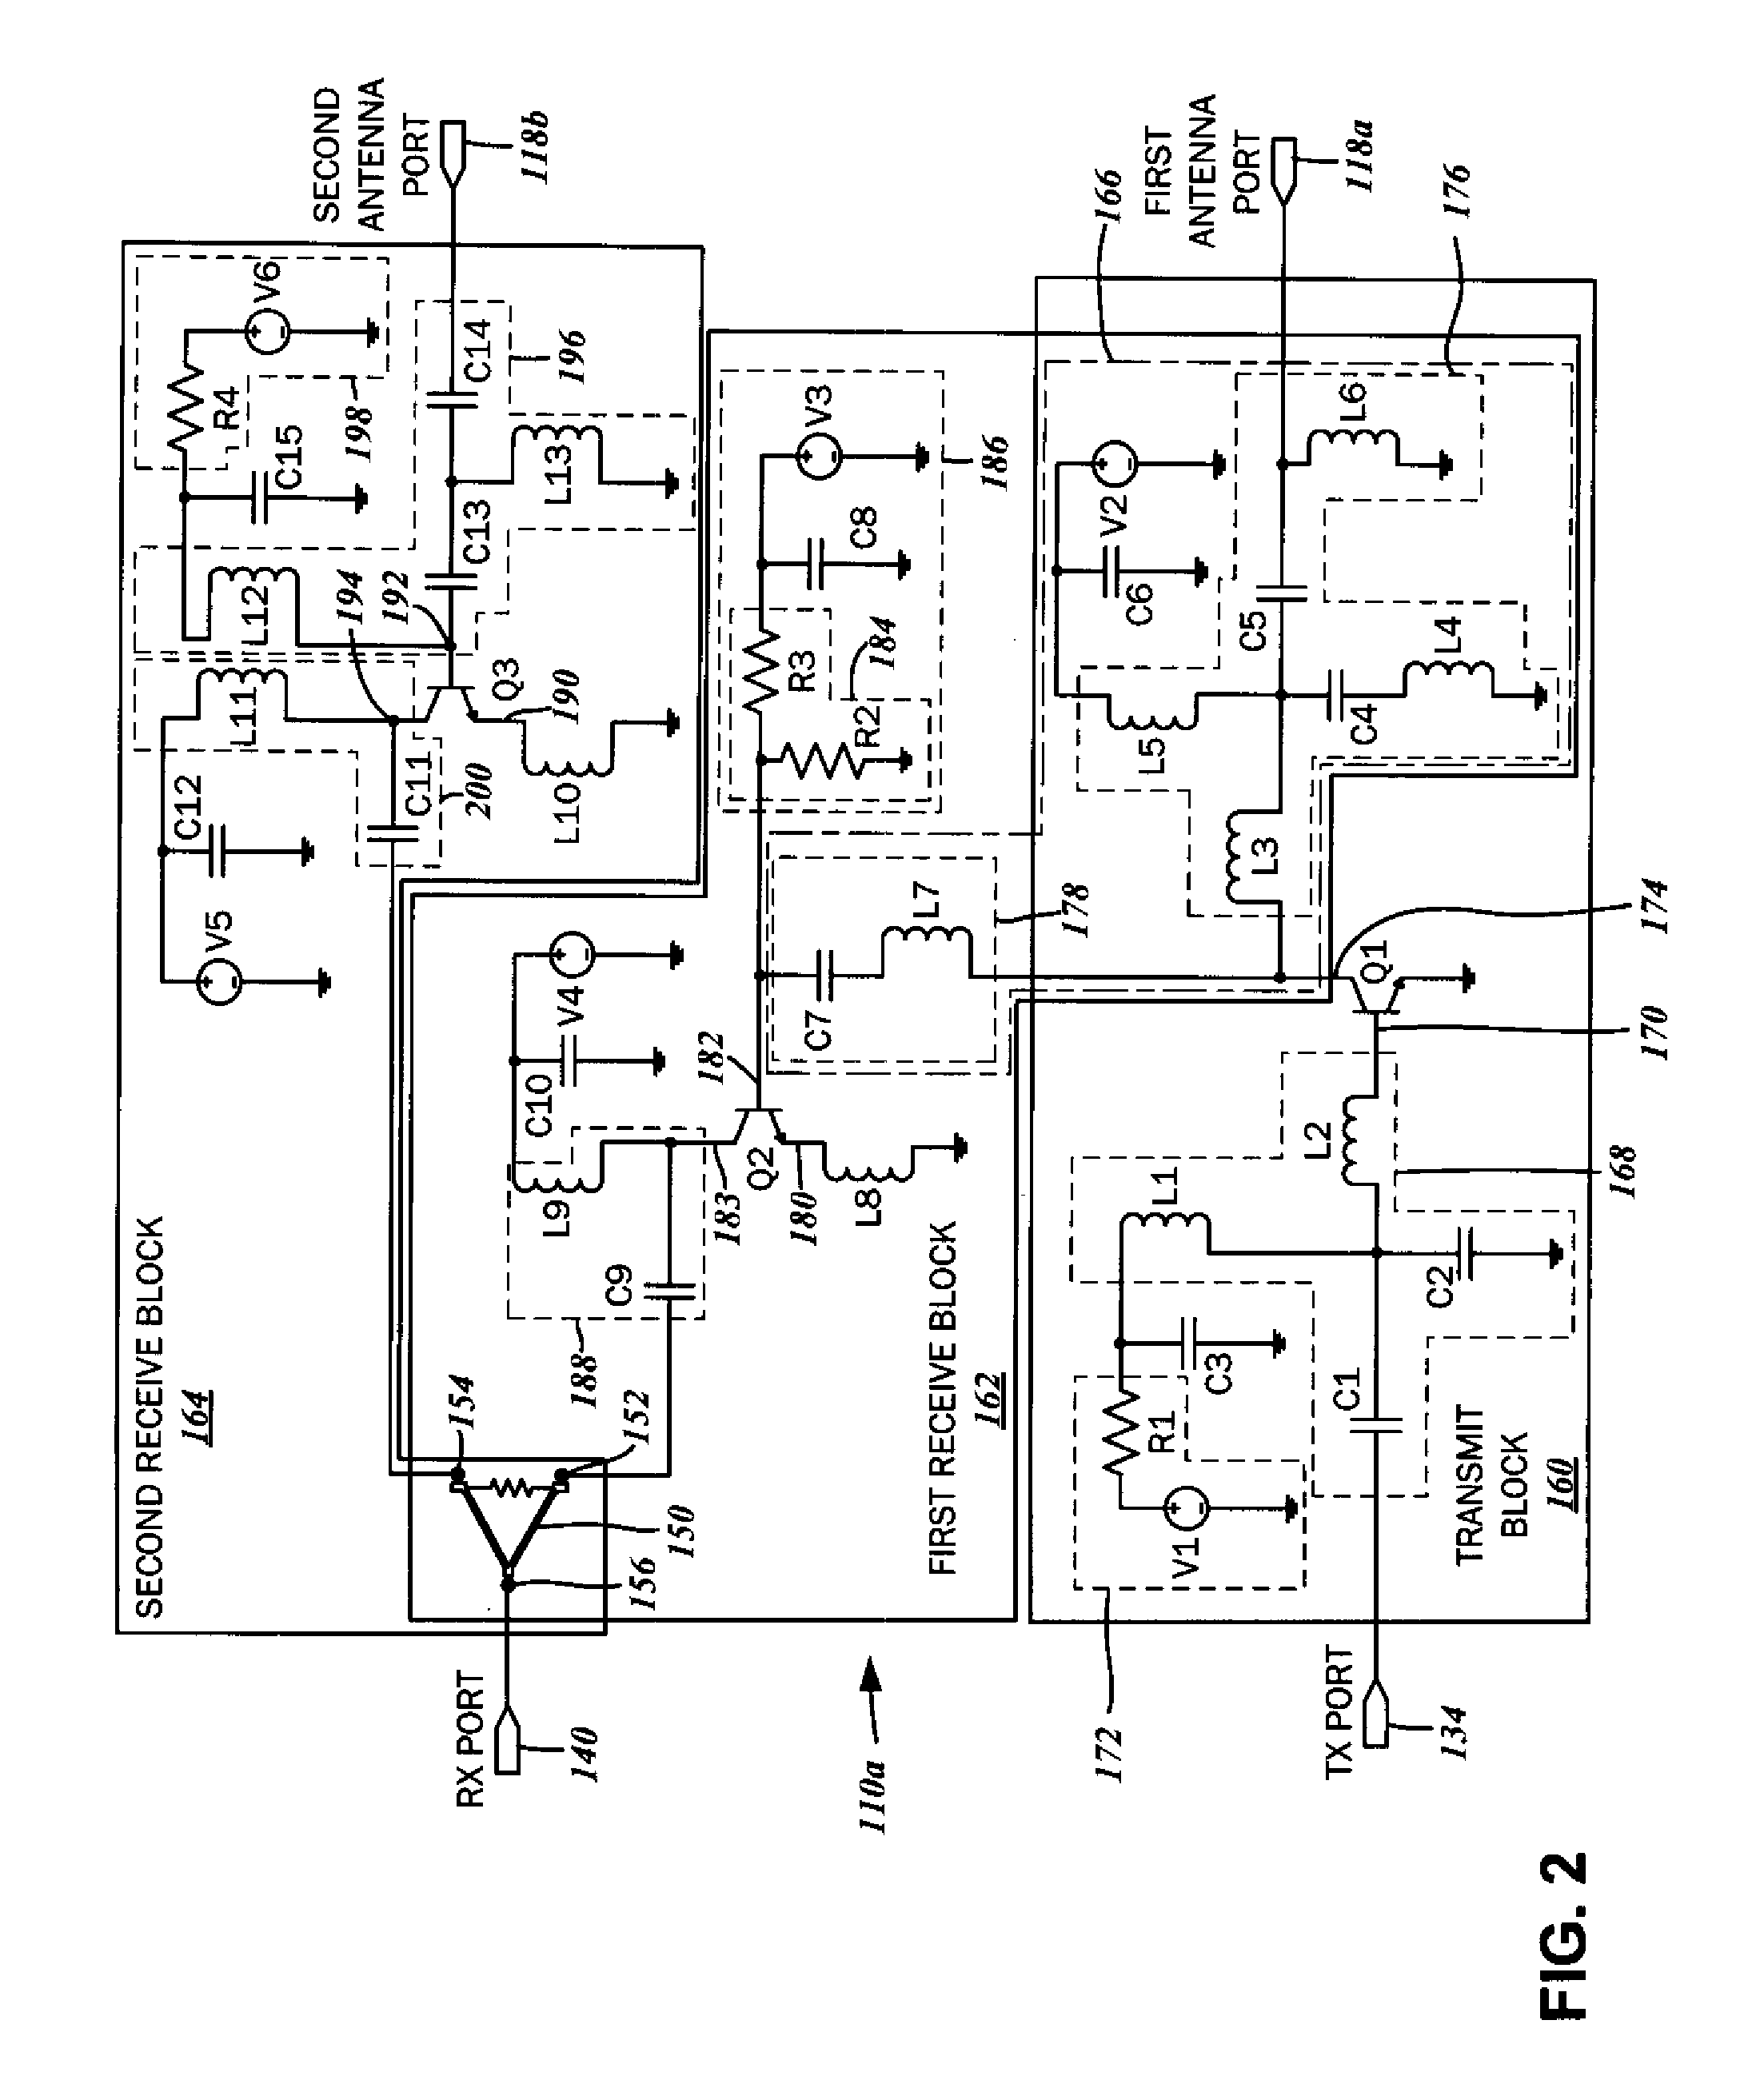 Radio Frequency Front End Circuit with Antenna Diversity for Multipath Mitigation